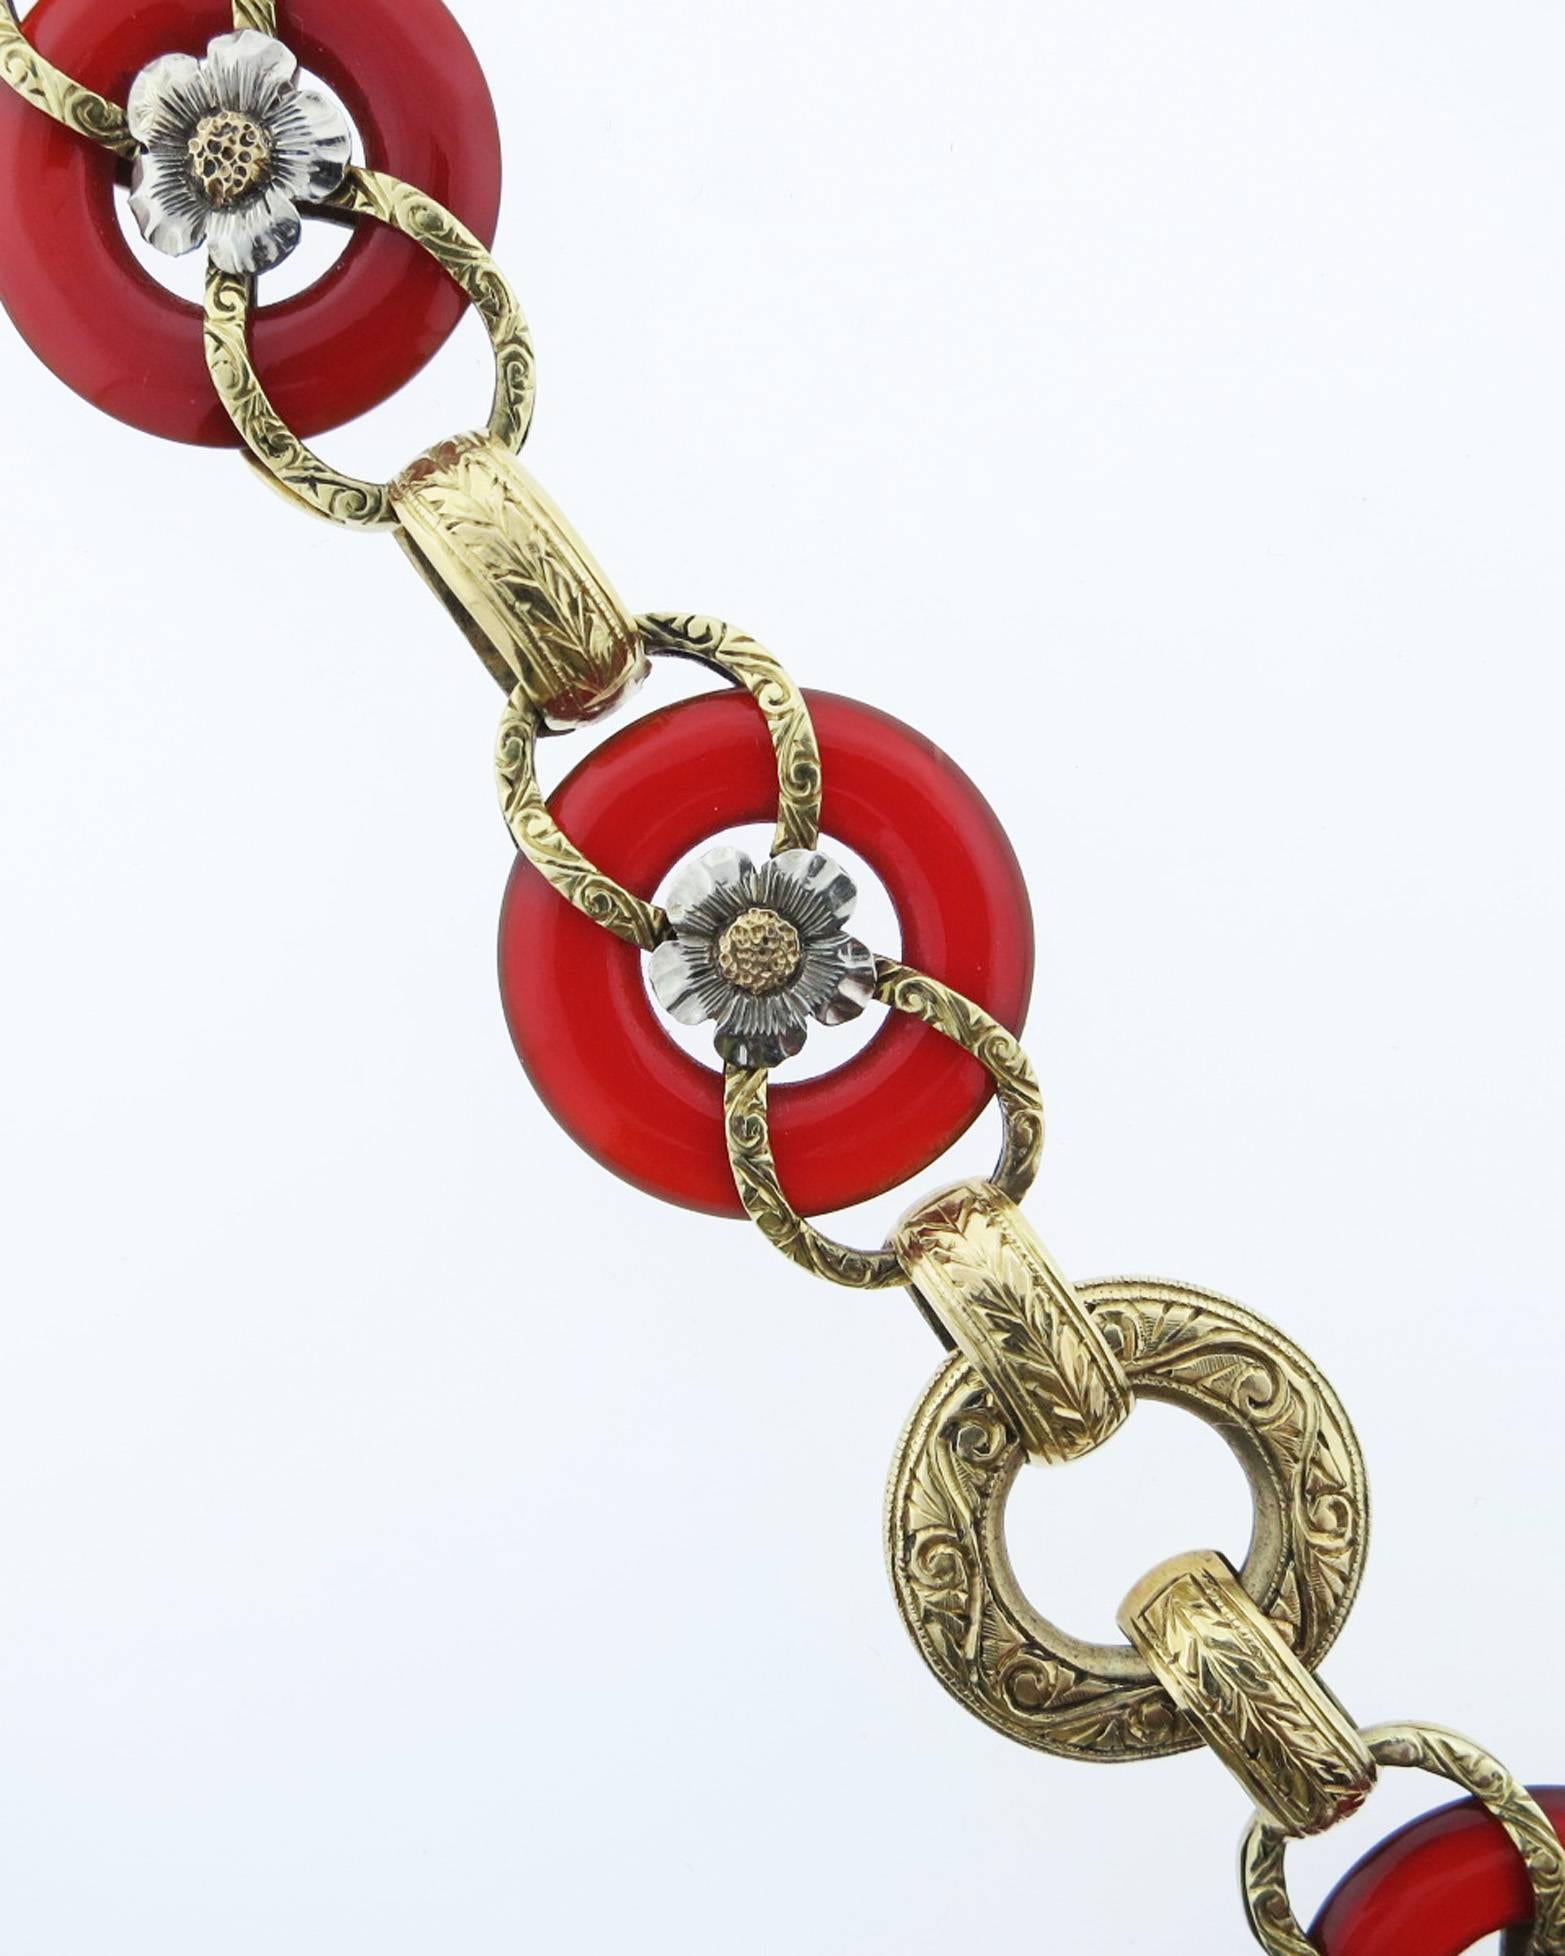 Beautifully made and heavily engraved 14kt. yellow gold bracelet consisting of four open carnelian rings inset with white gold flower centers and four connecting gold links.The bracelet measures 7 3/4 inches of length. Circa 1900. 
Excellent